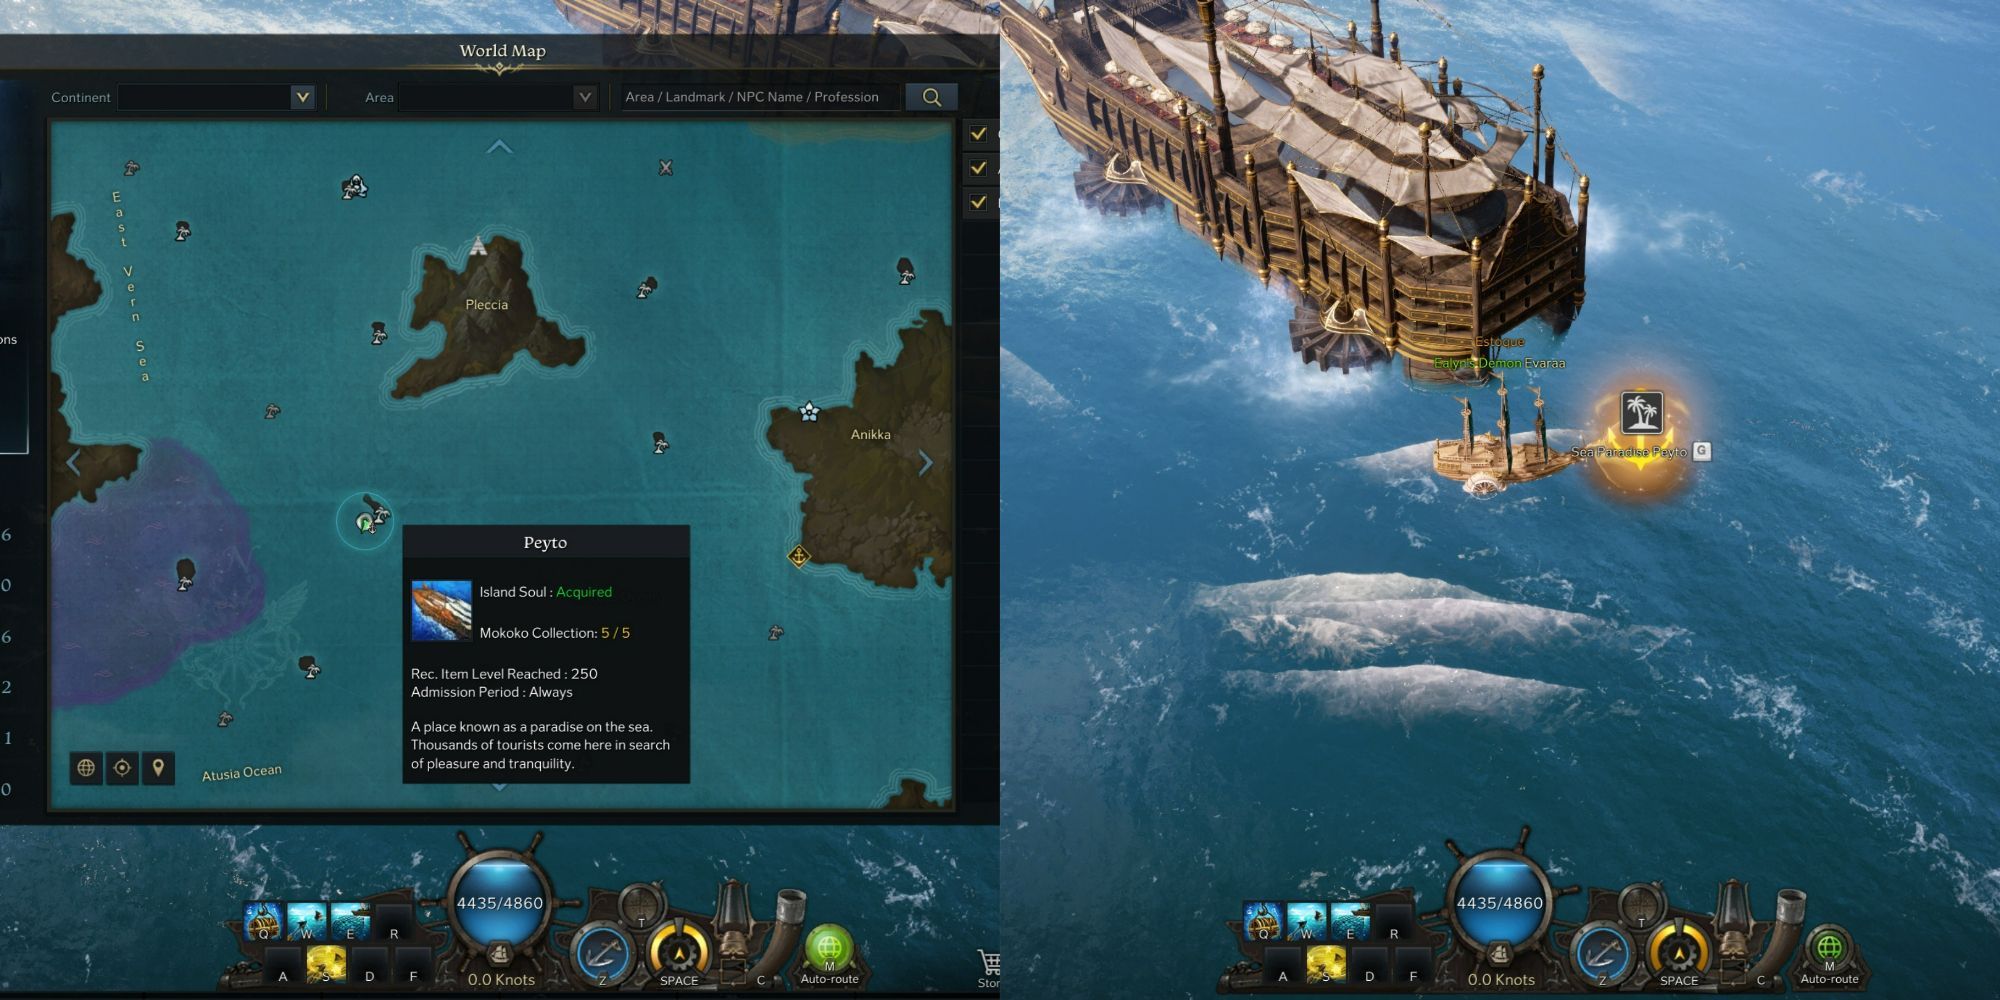 Lost Ark split image of Peyto location on open seas and map location